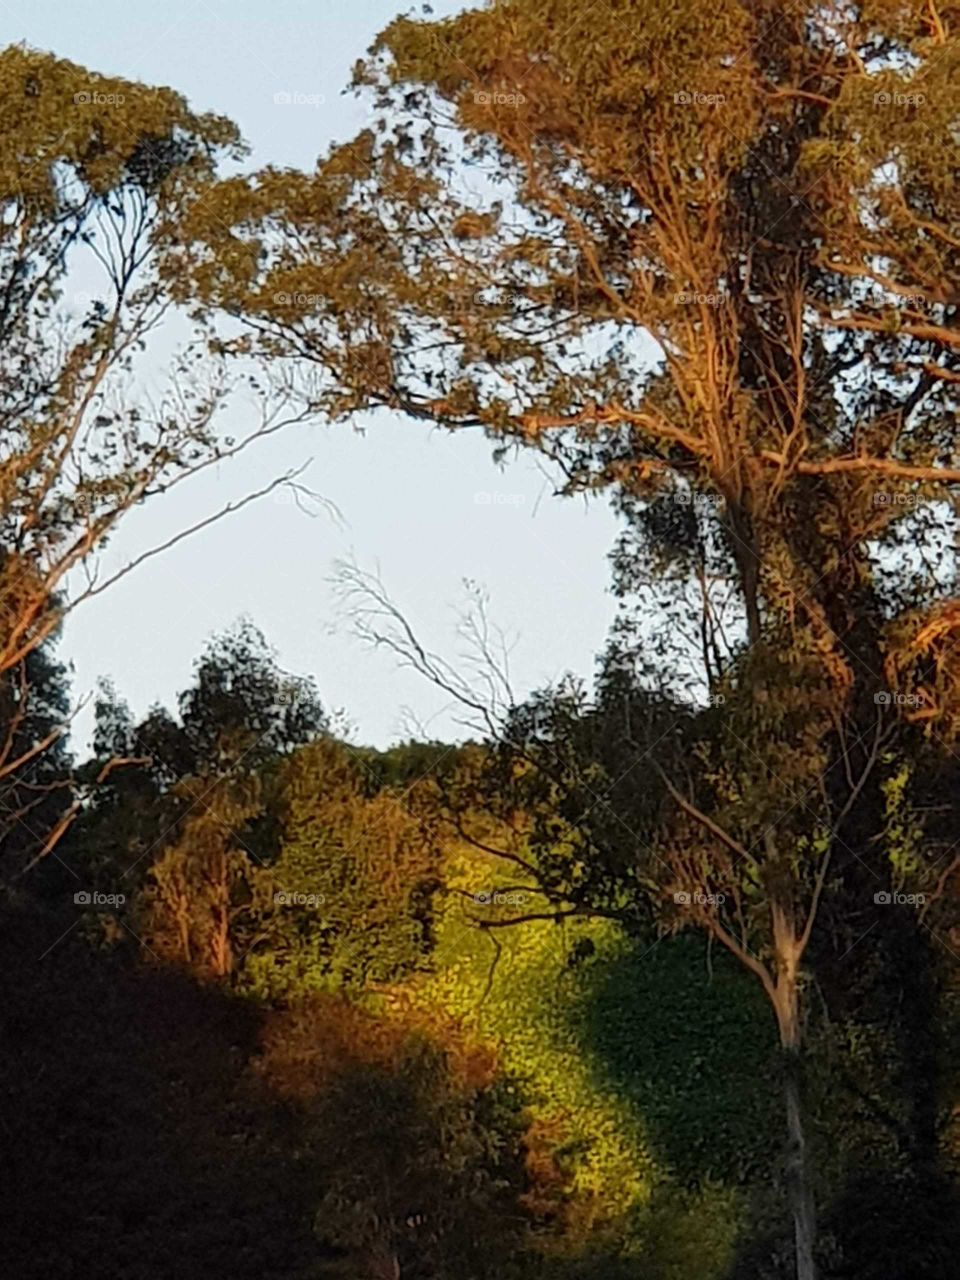 As the sun rises in the mourning The sun splashes bright light on the trees above me on our hill the blend of light and dark is stunning and captures a moment.